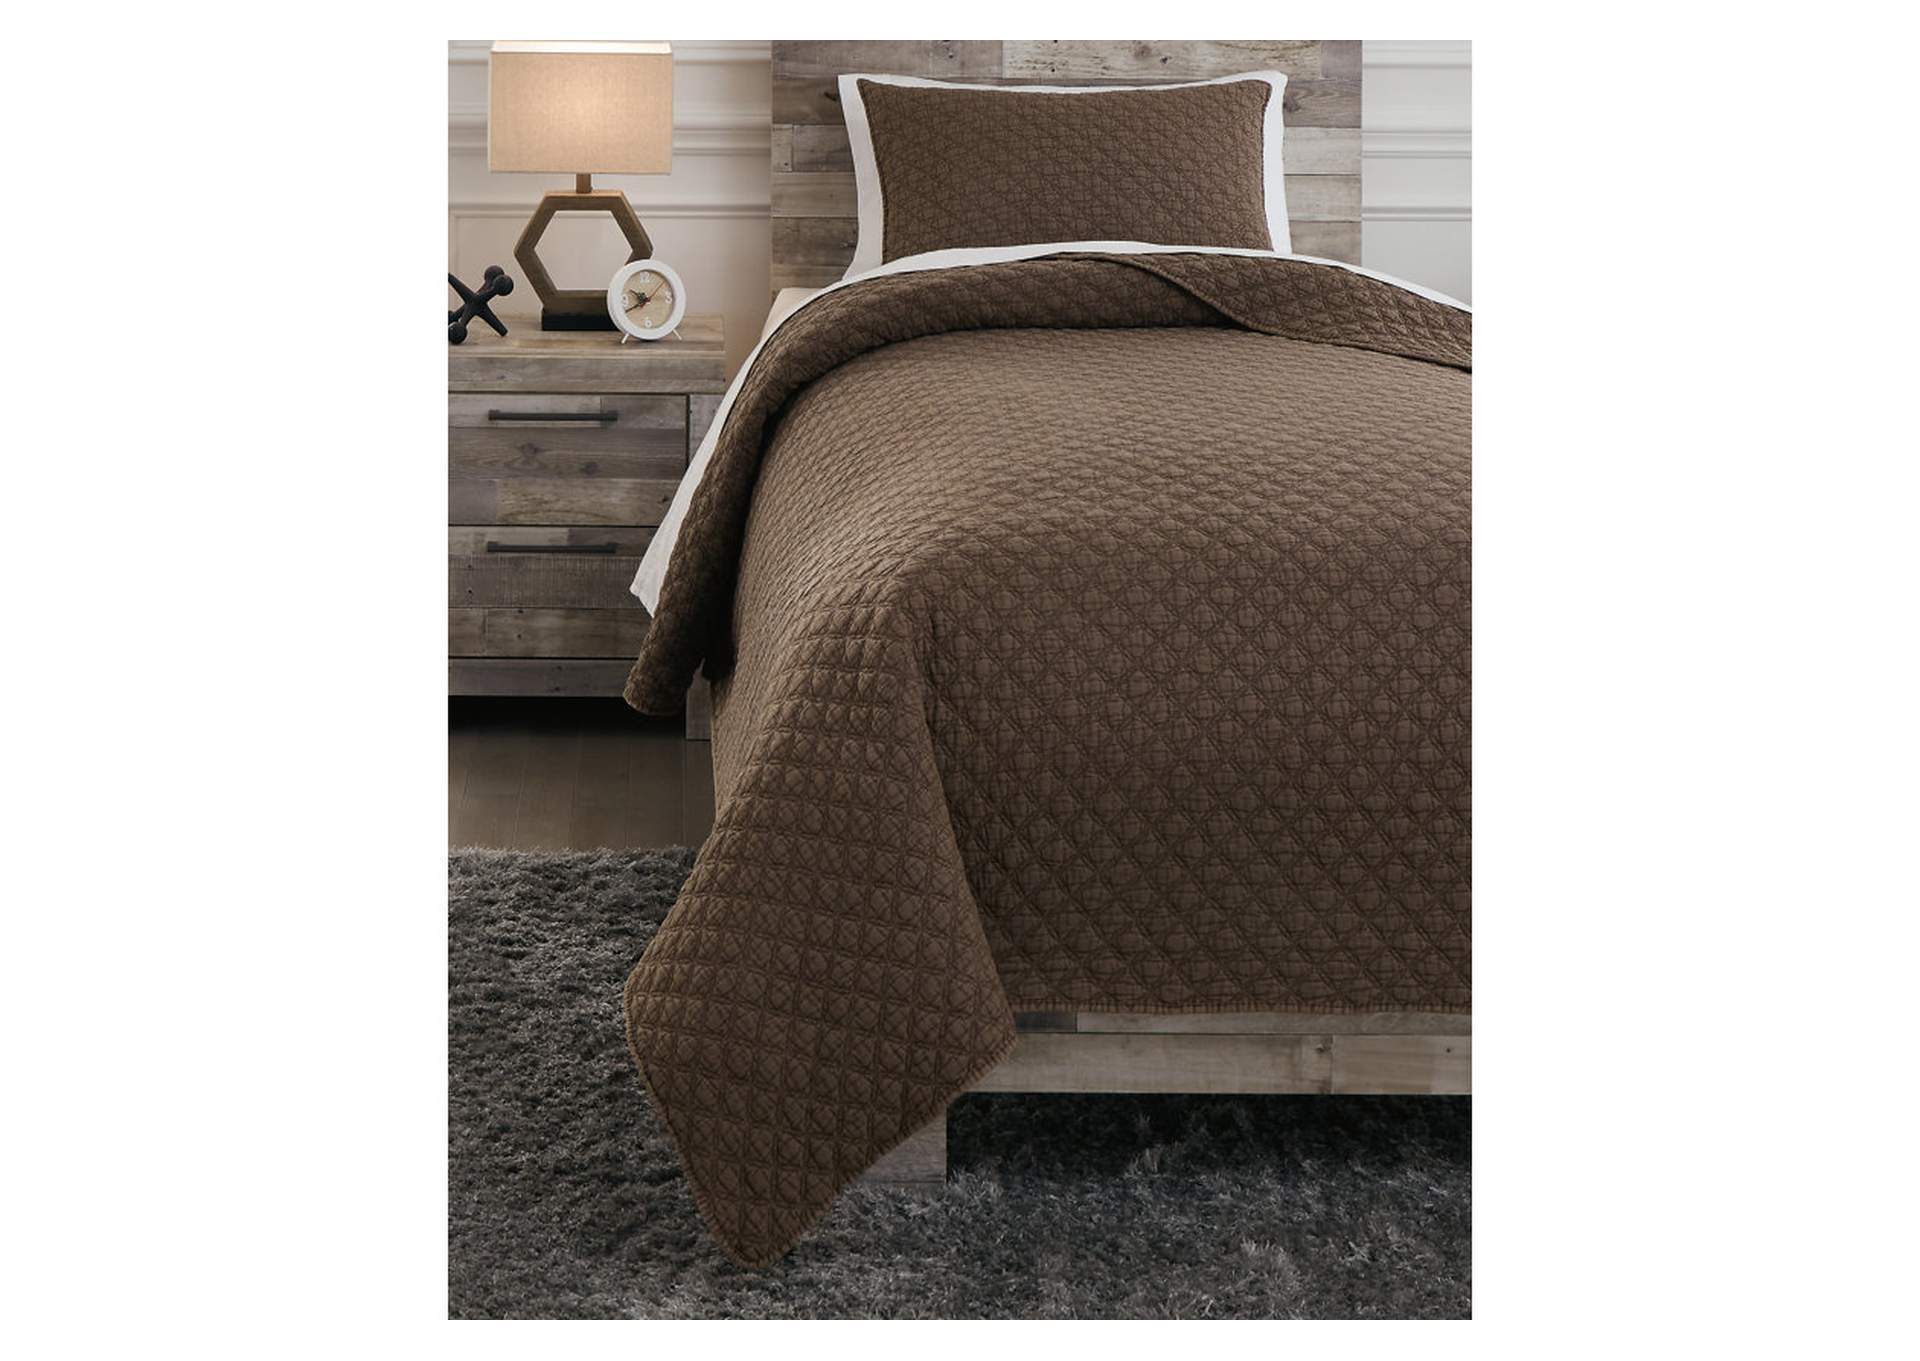 Ryter Twin Coverlet Set,Signature Design By Ashley